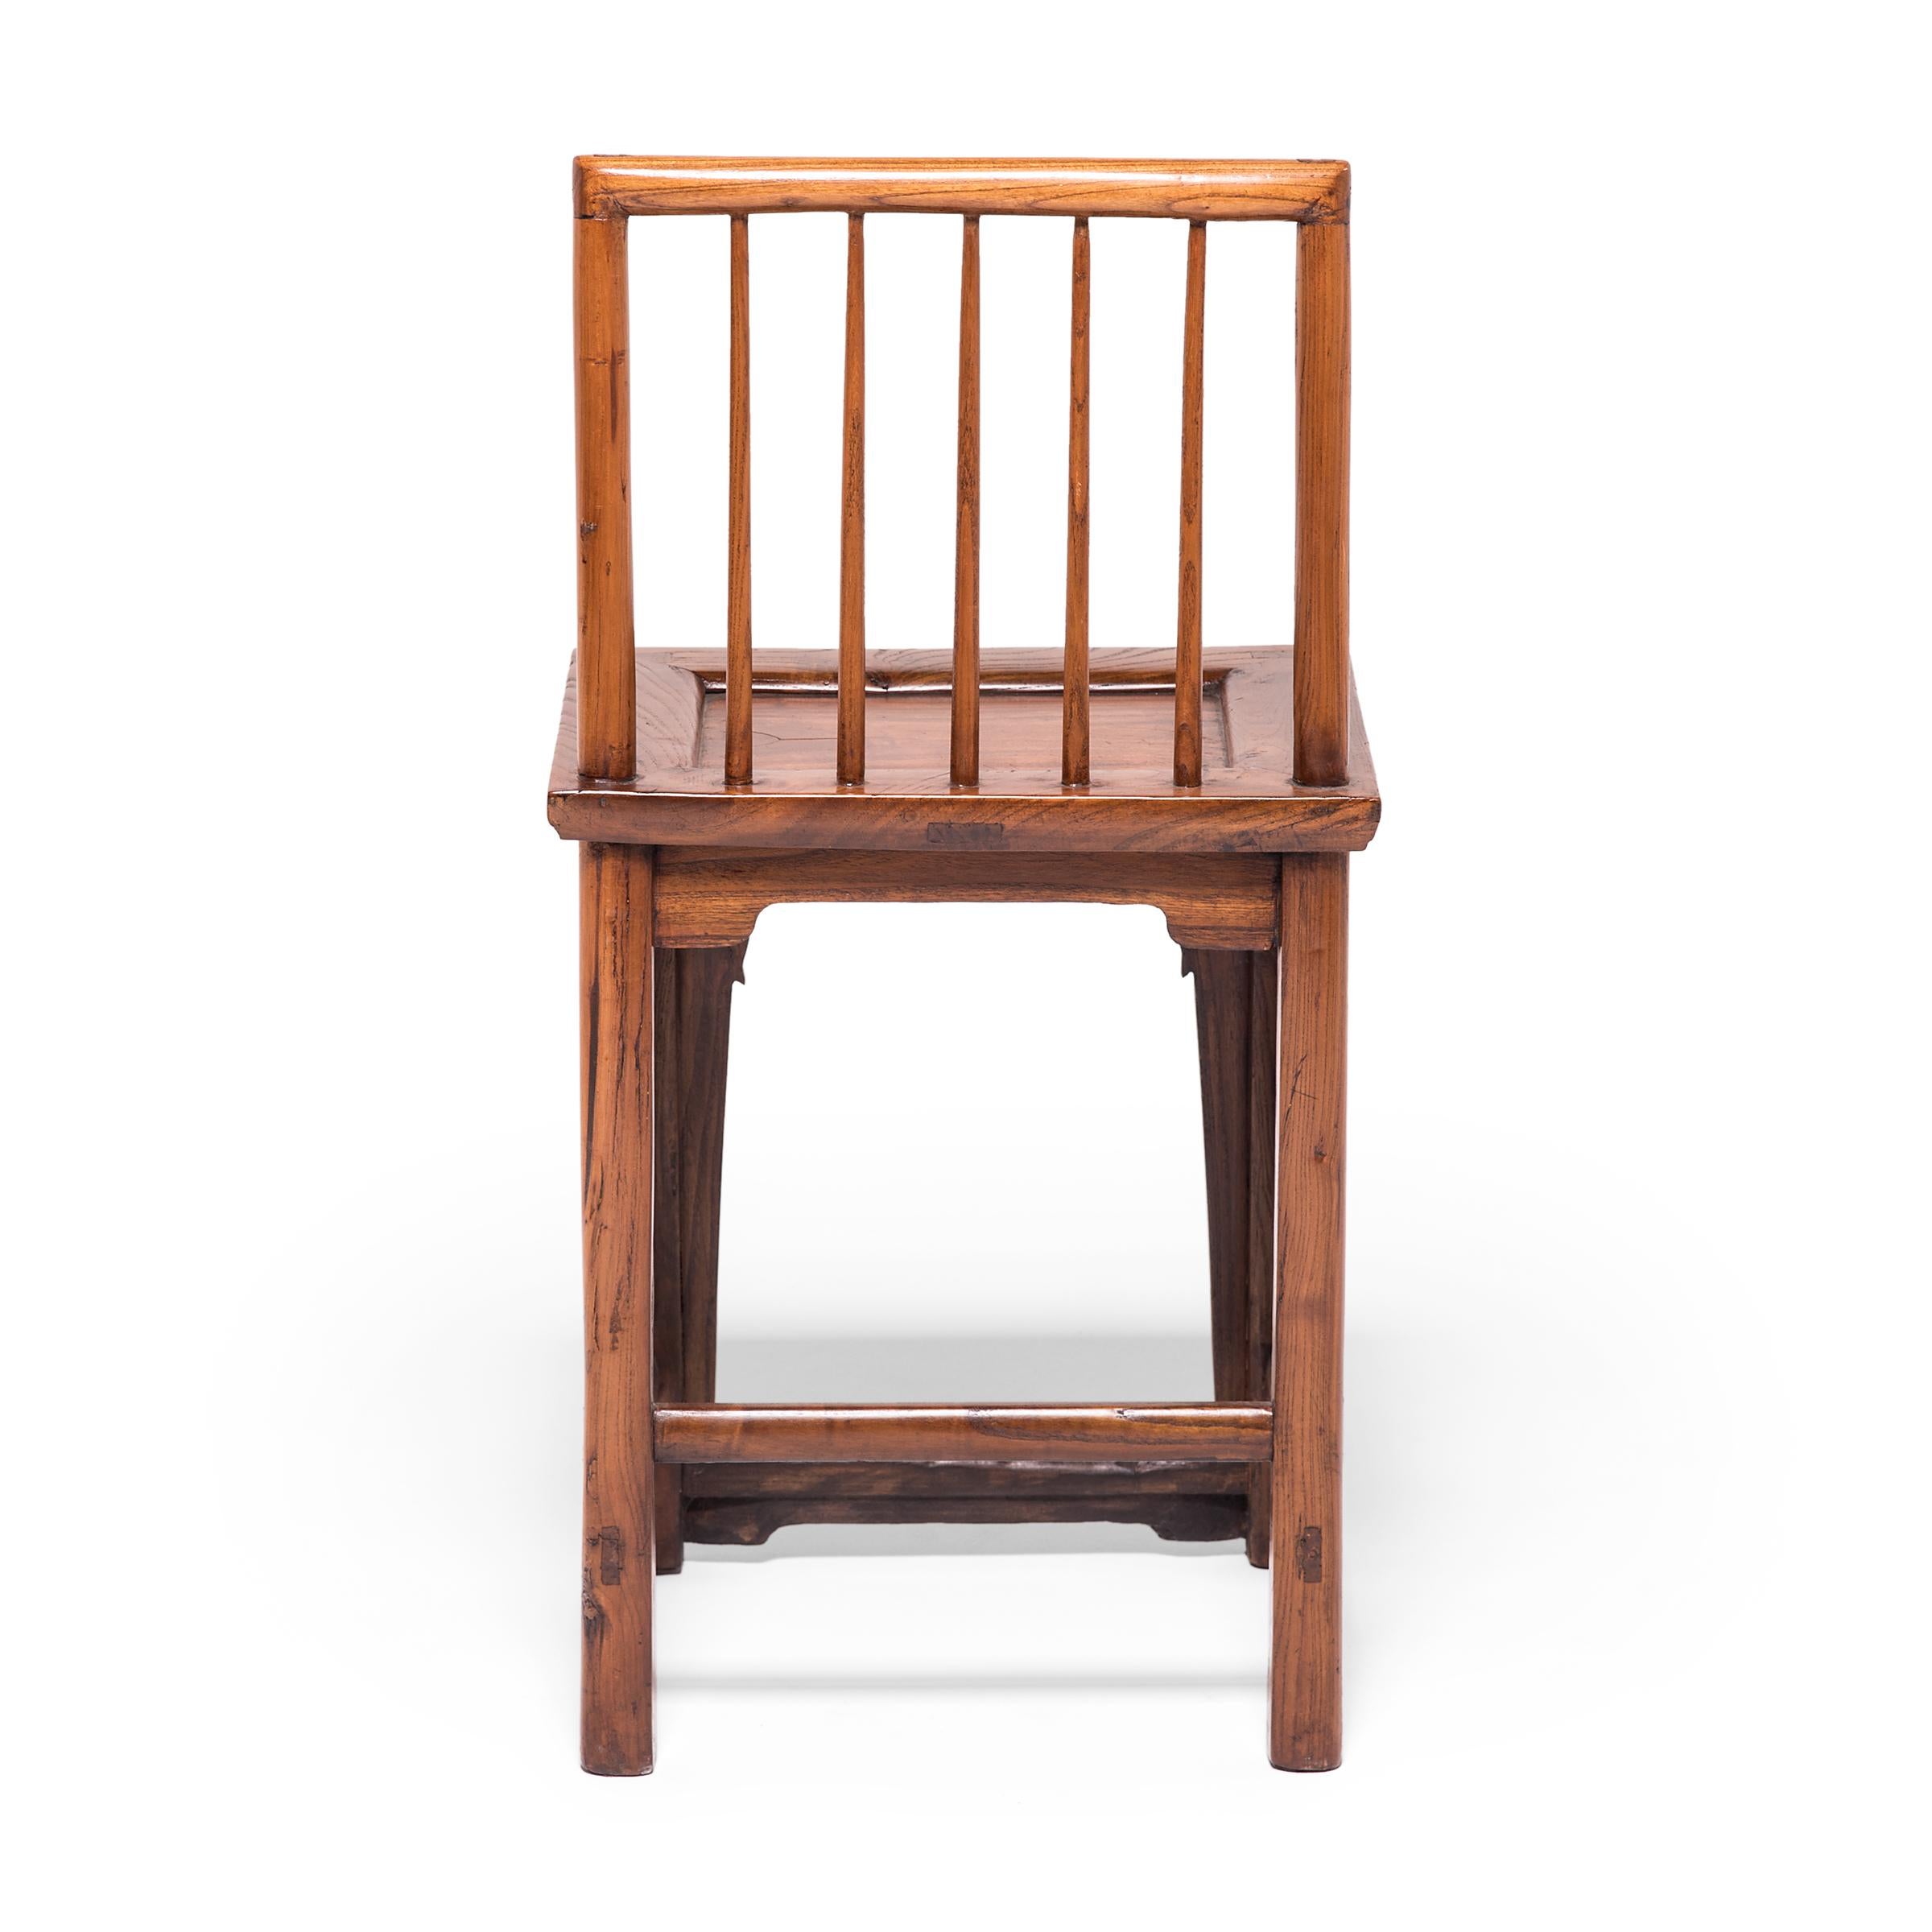 Pair of Chinese Walnut Spindleback Chairs, c. 1900 For Sale 5